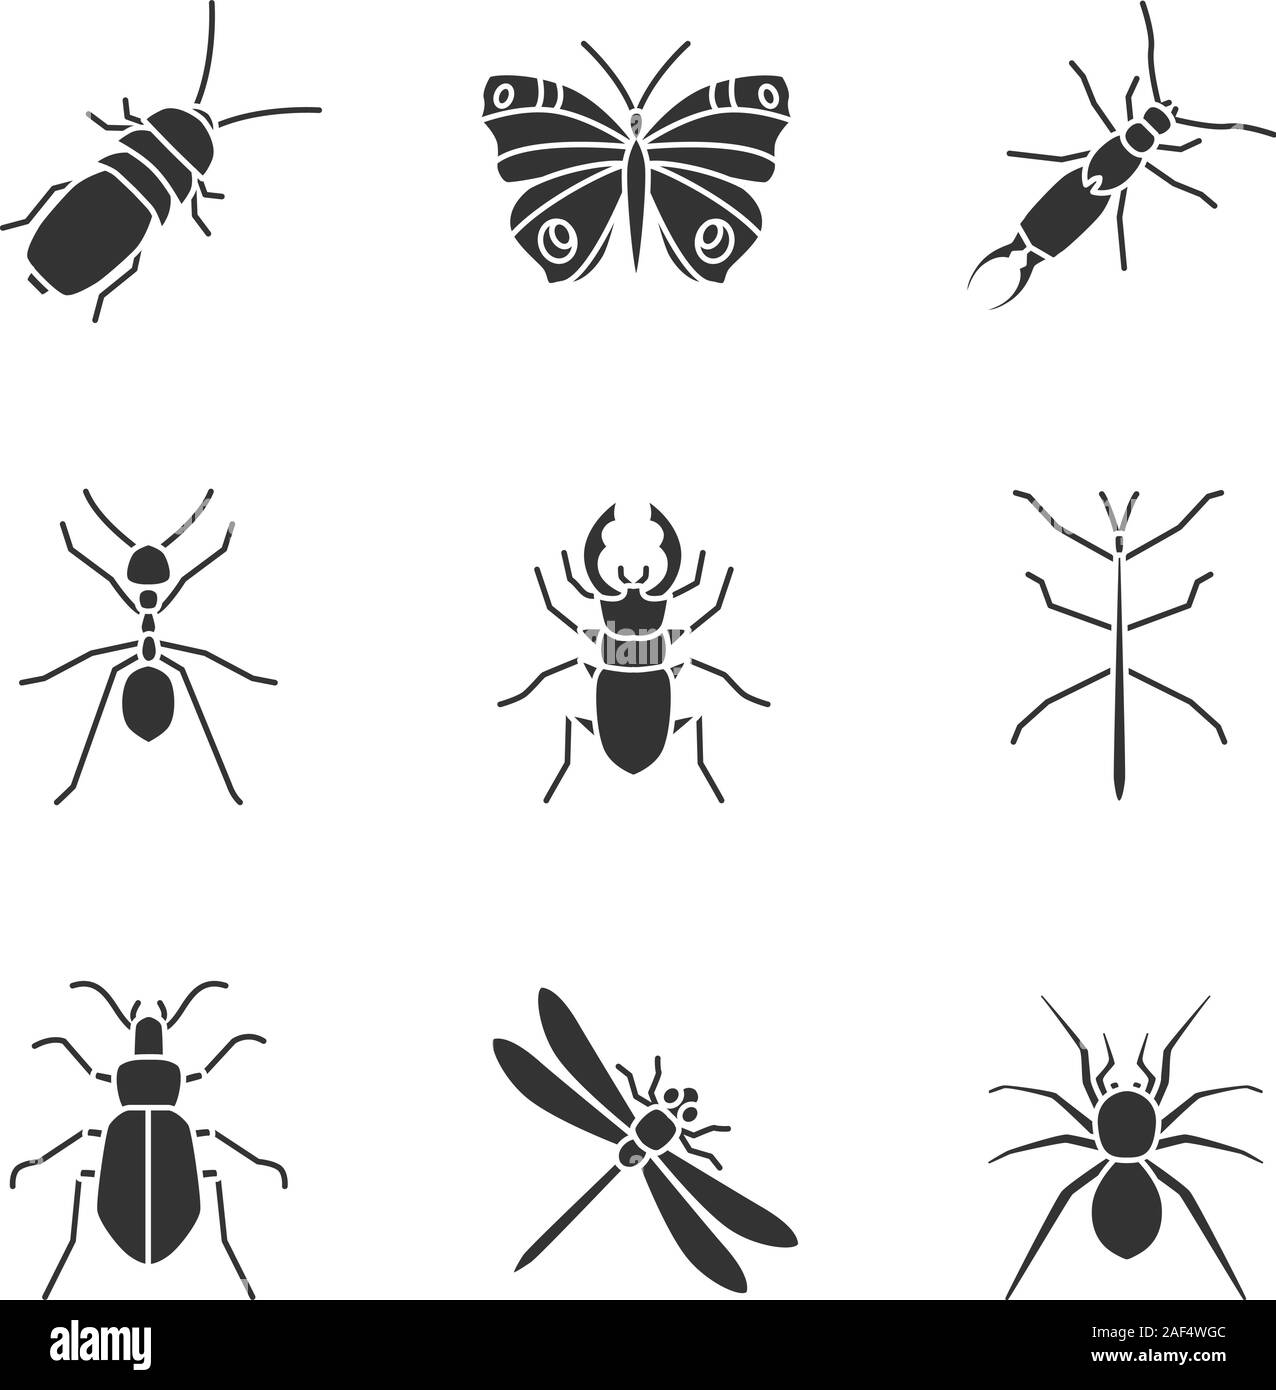 Insects glyph icons set. Darkling beetle, butterfly, earwig, stag and ground bugs, phasmid, ant, dragonfly, spider. Silhouette symbols. Vector isolate Stock Vector